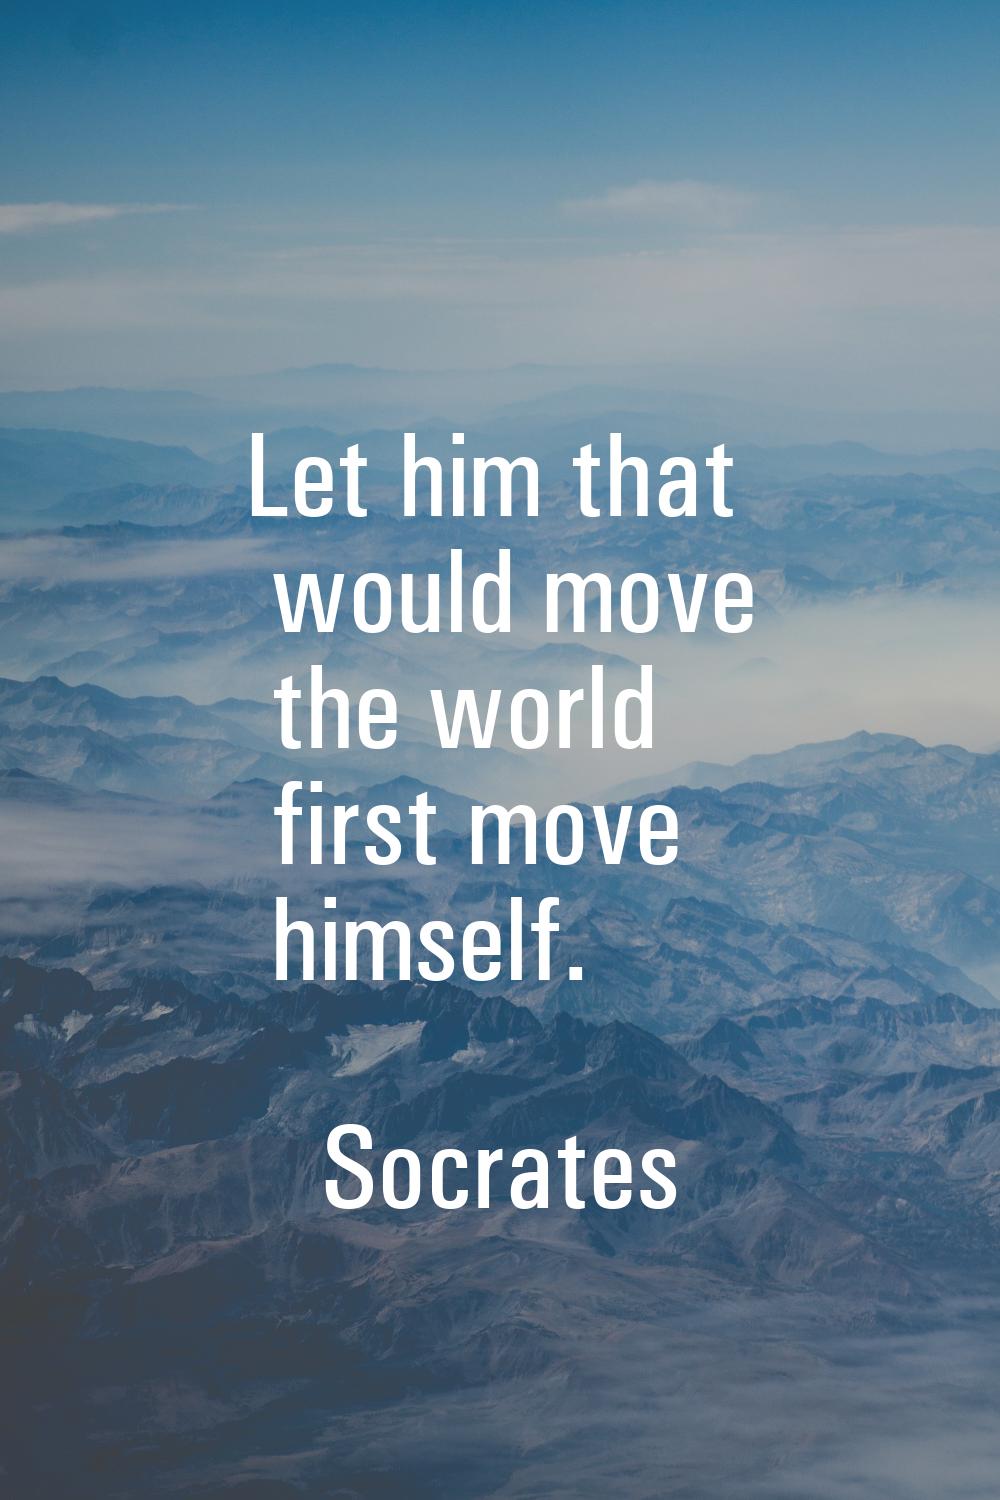 Let him that would move the world first move himself.